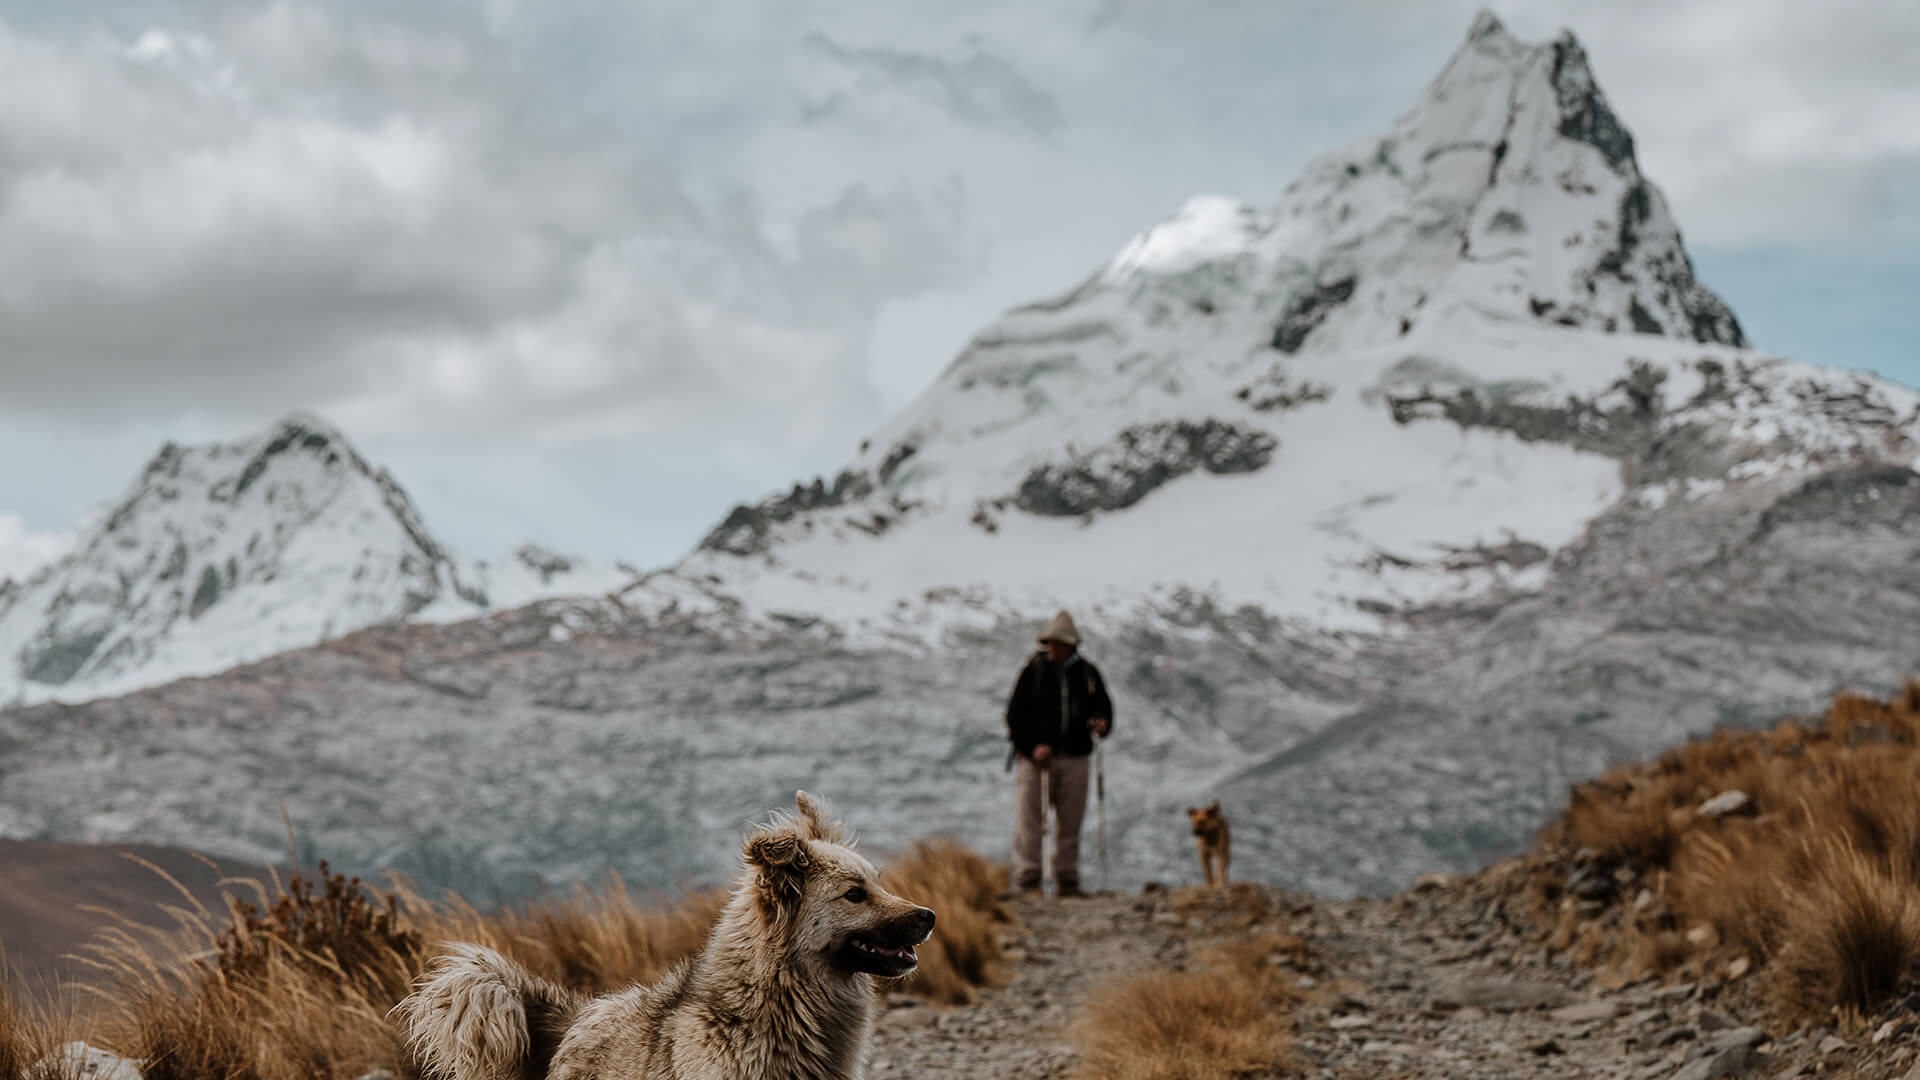 Man and two dogs with background of snowy peak in the Andes of Northern Peru | Llama Trek Olleros to Chavin with RESPONSible Travel Peru | Photo by Bjorn Snelders